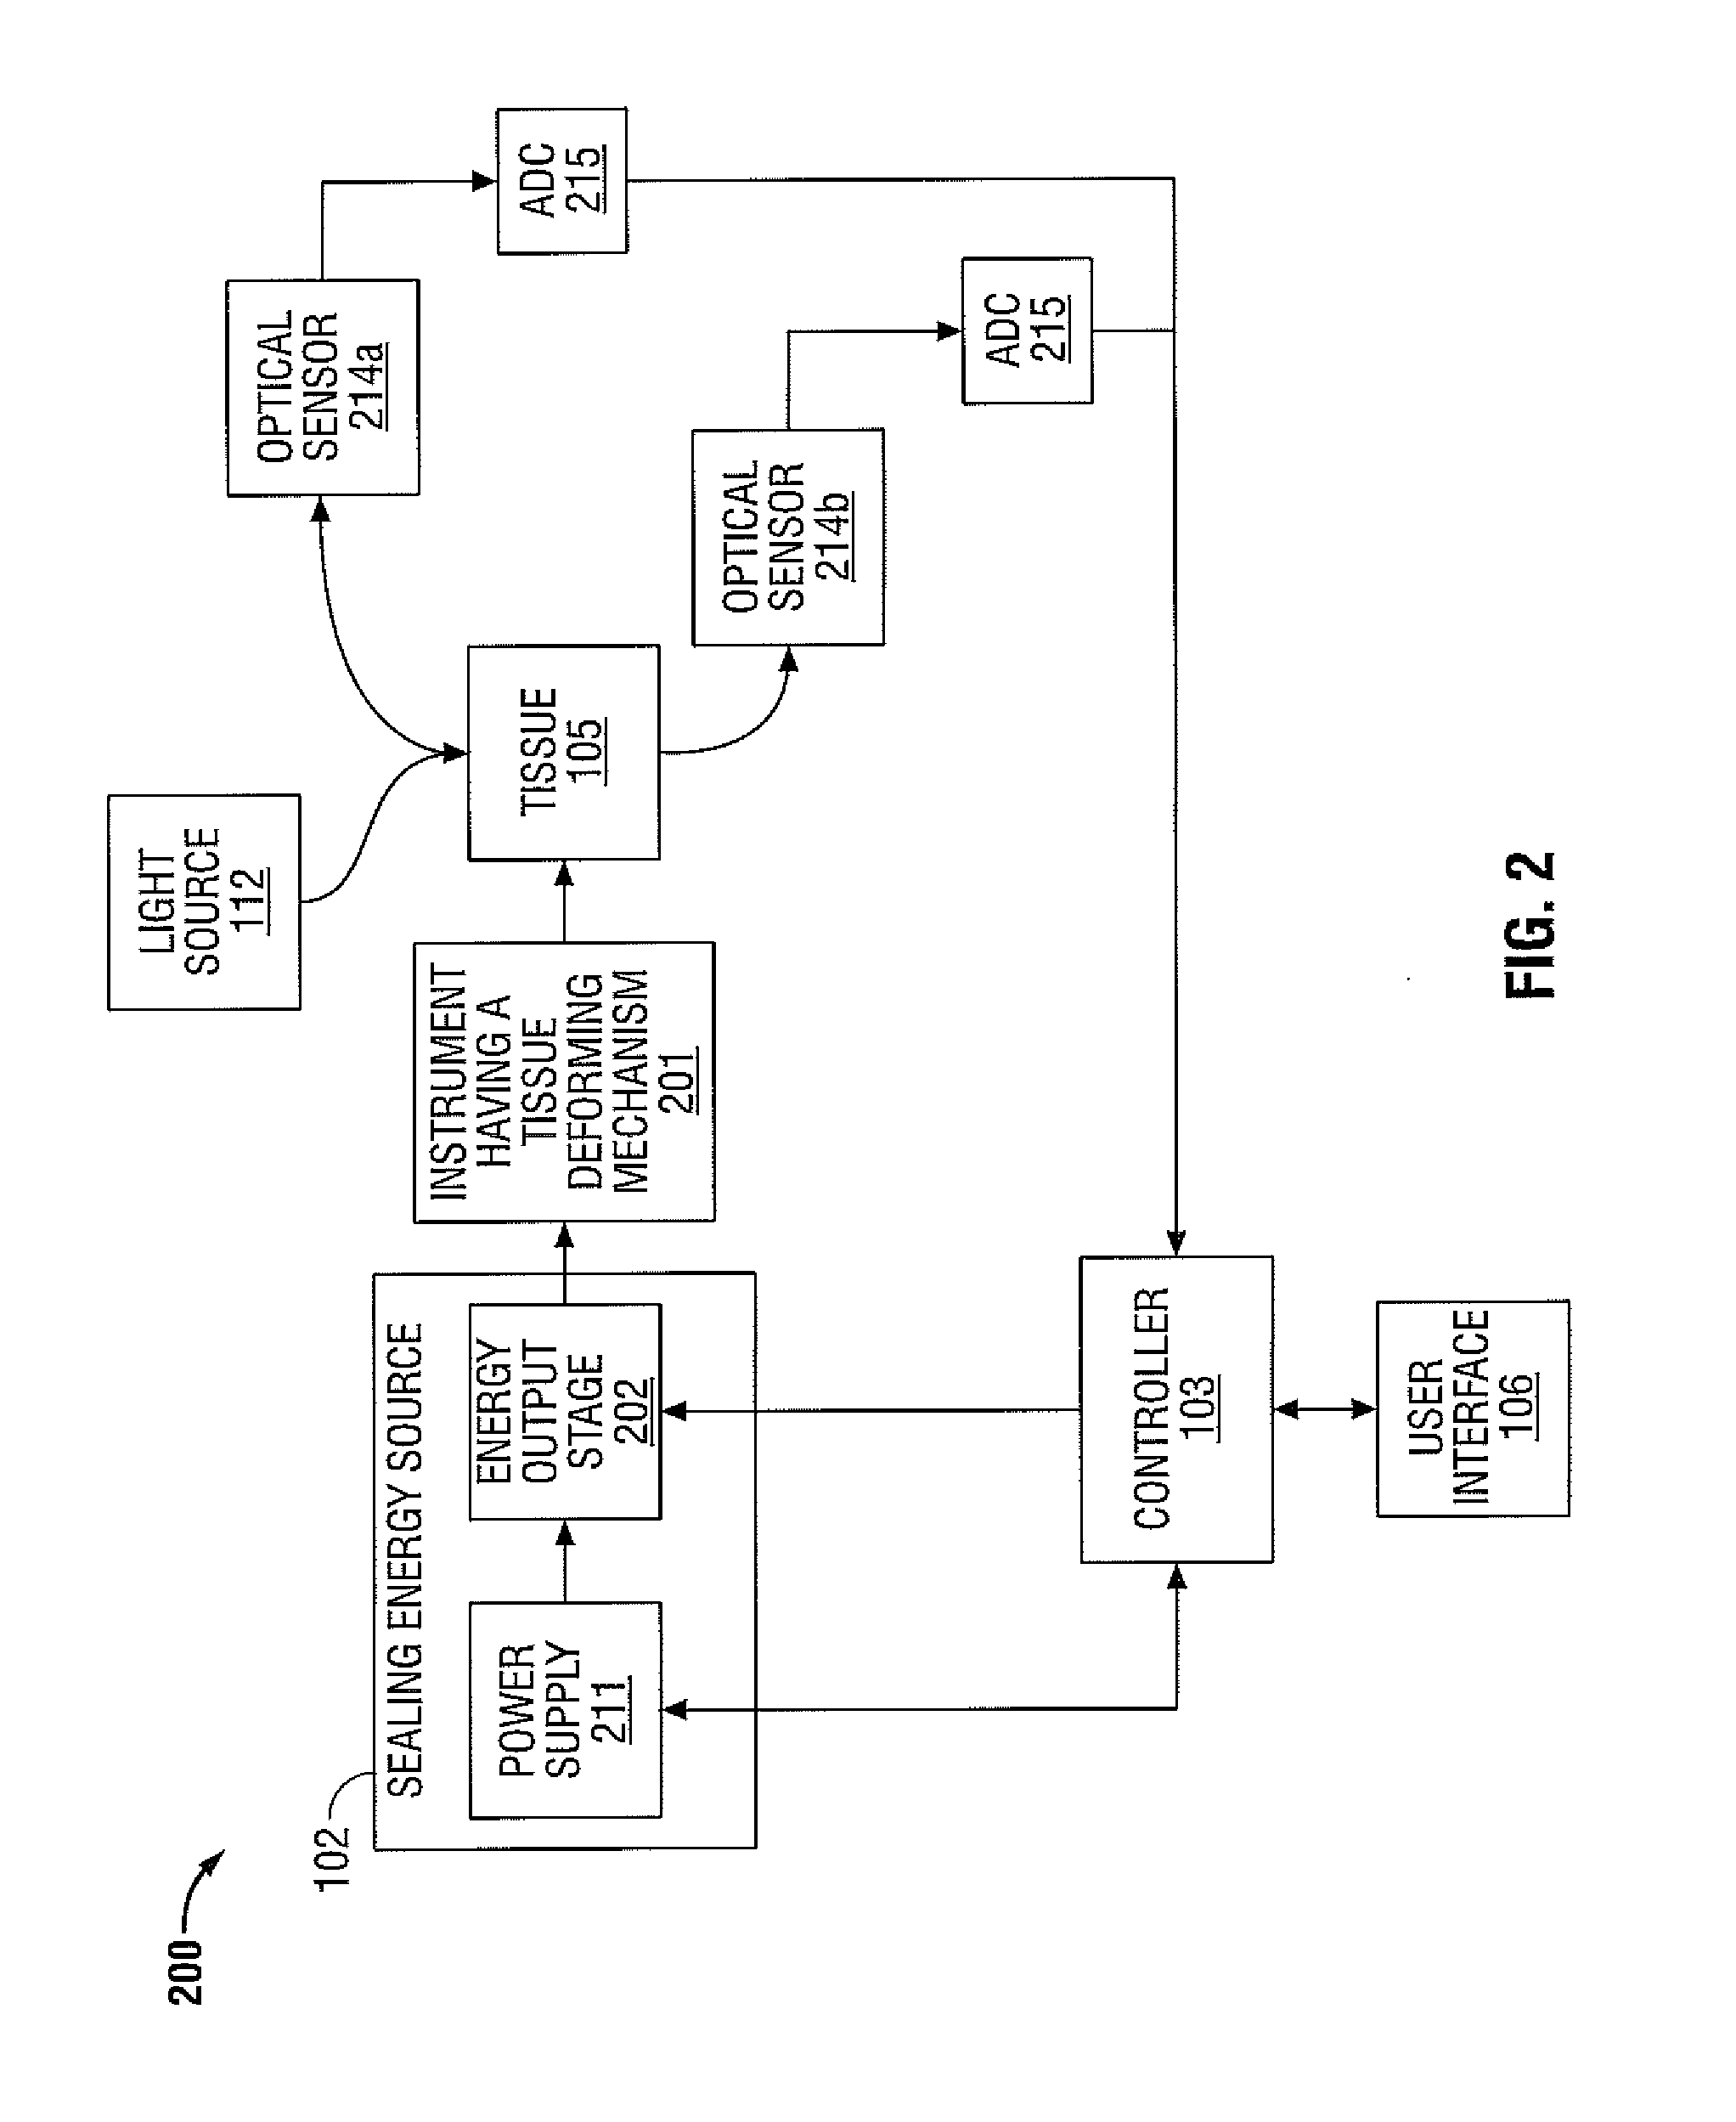 System and Methods for Energy-Based Sealing of Tissue with Optical Feedback